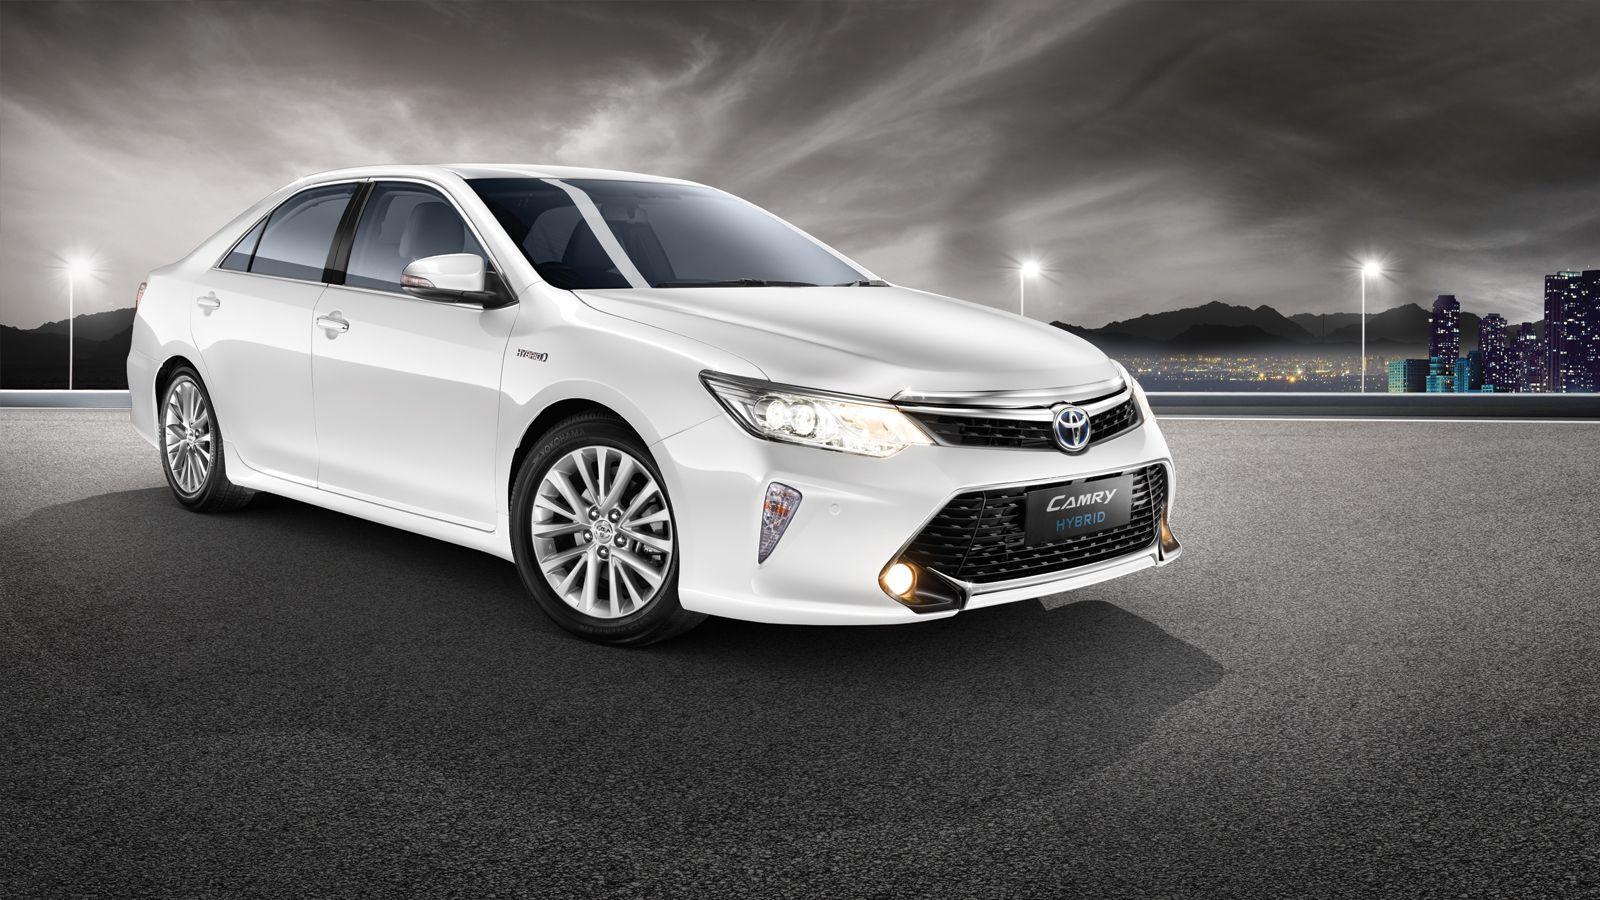 Toyota Camry Wallpaper HD Photo, Wallpaper and other Image